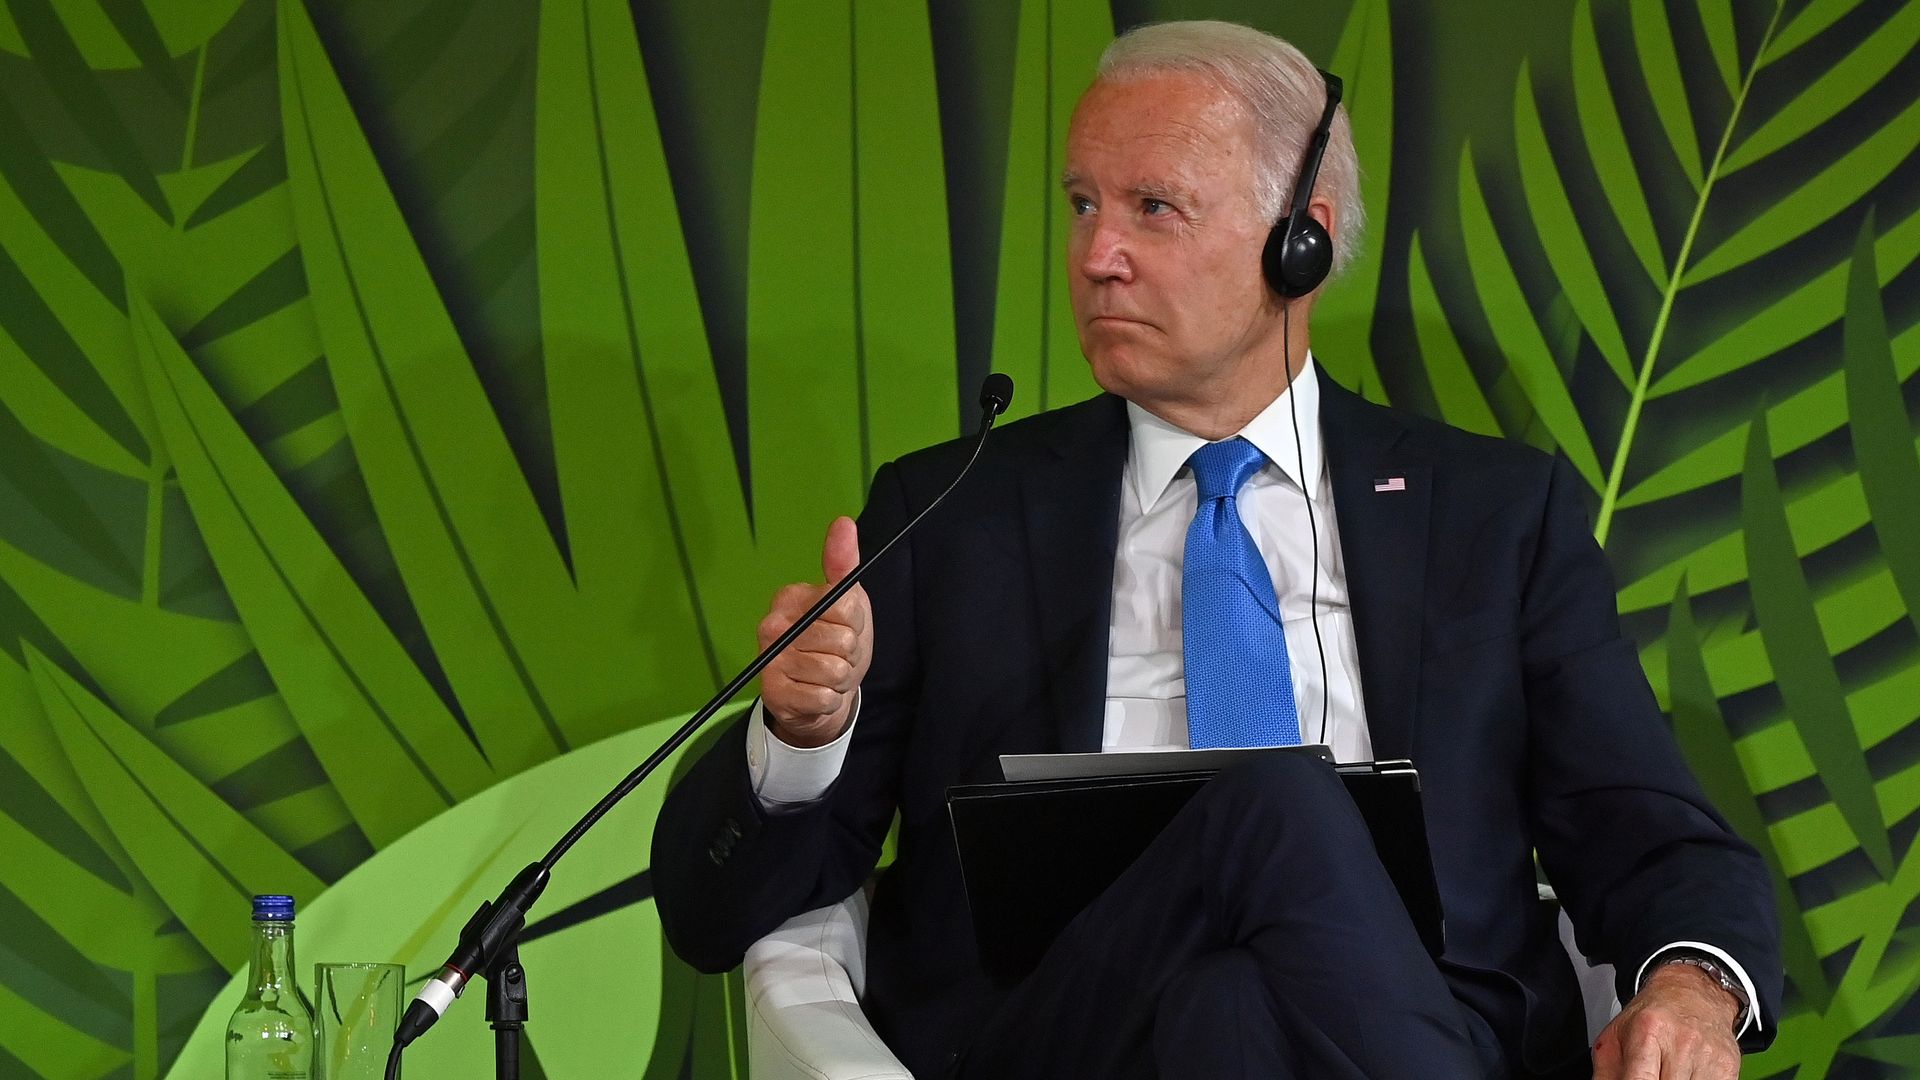 President Joe Biden reacts during an Action on Forests and Land Use event on day three of COP26 at SECC on November 2, 2021 in Glasgow, United Kingdom. 